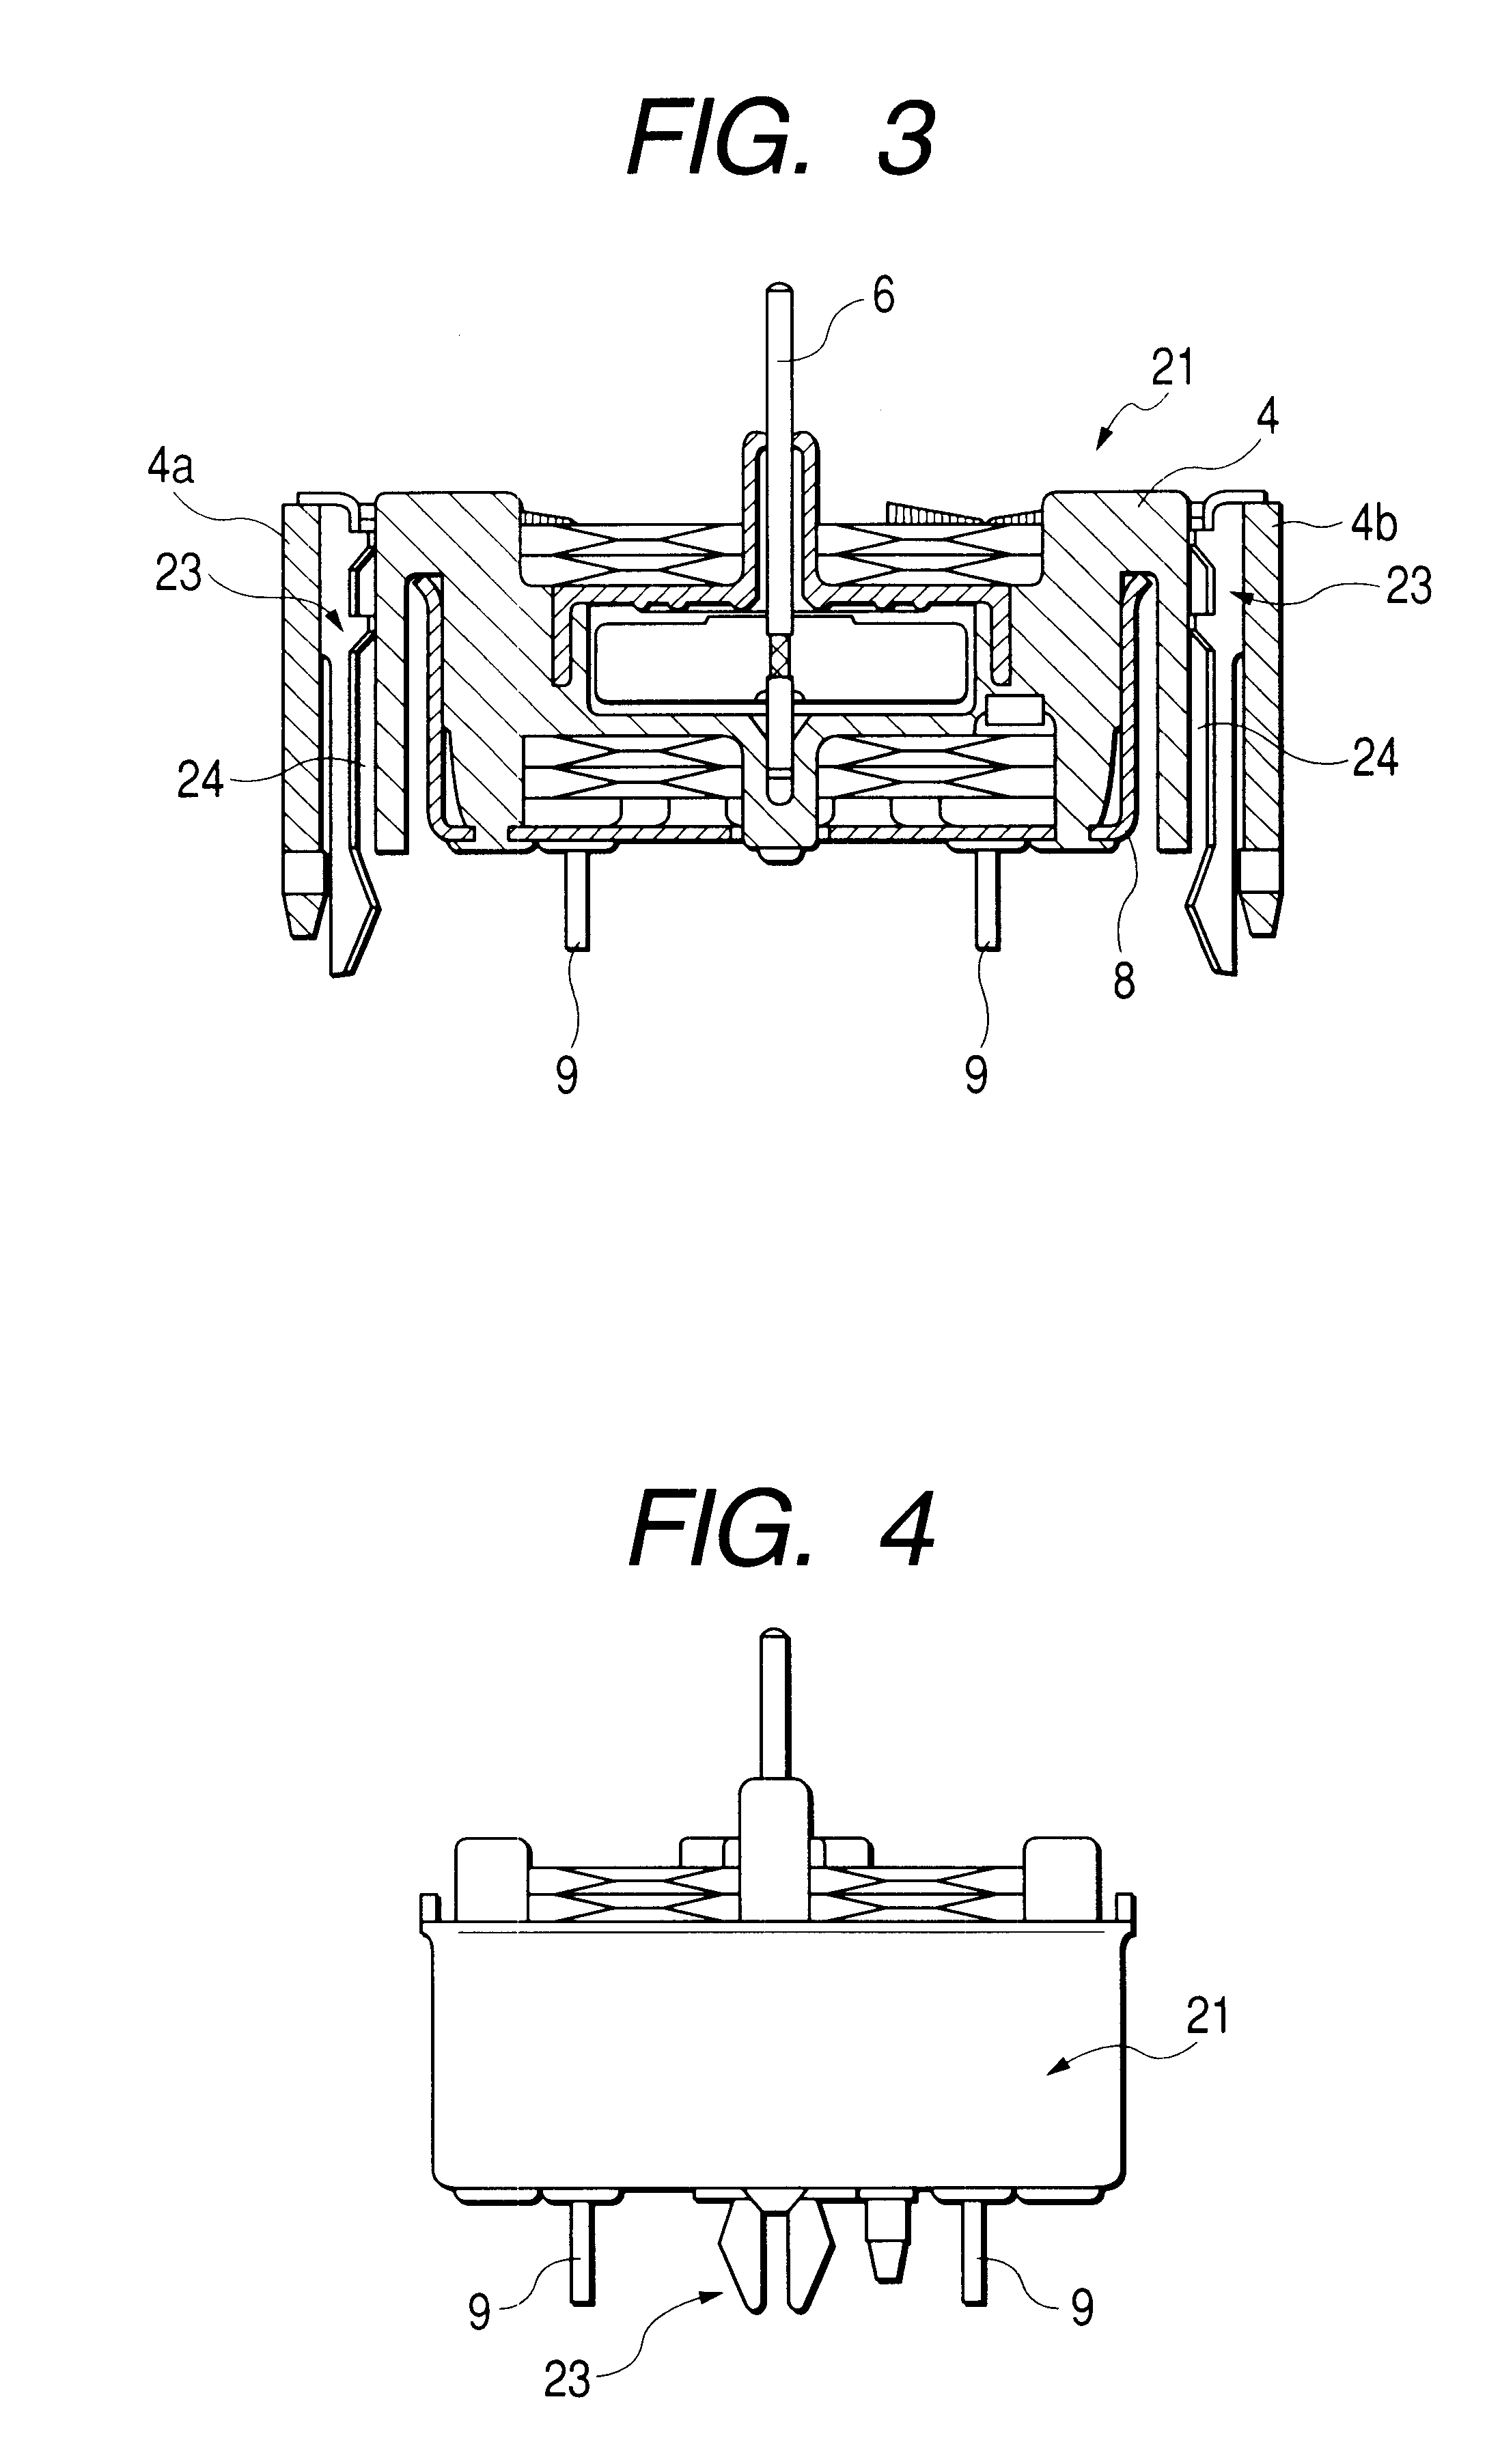 Attachment structure of electronic component to circuit board and clip used in attachment of the electronic component